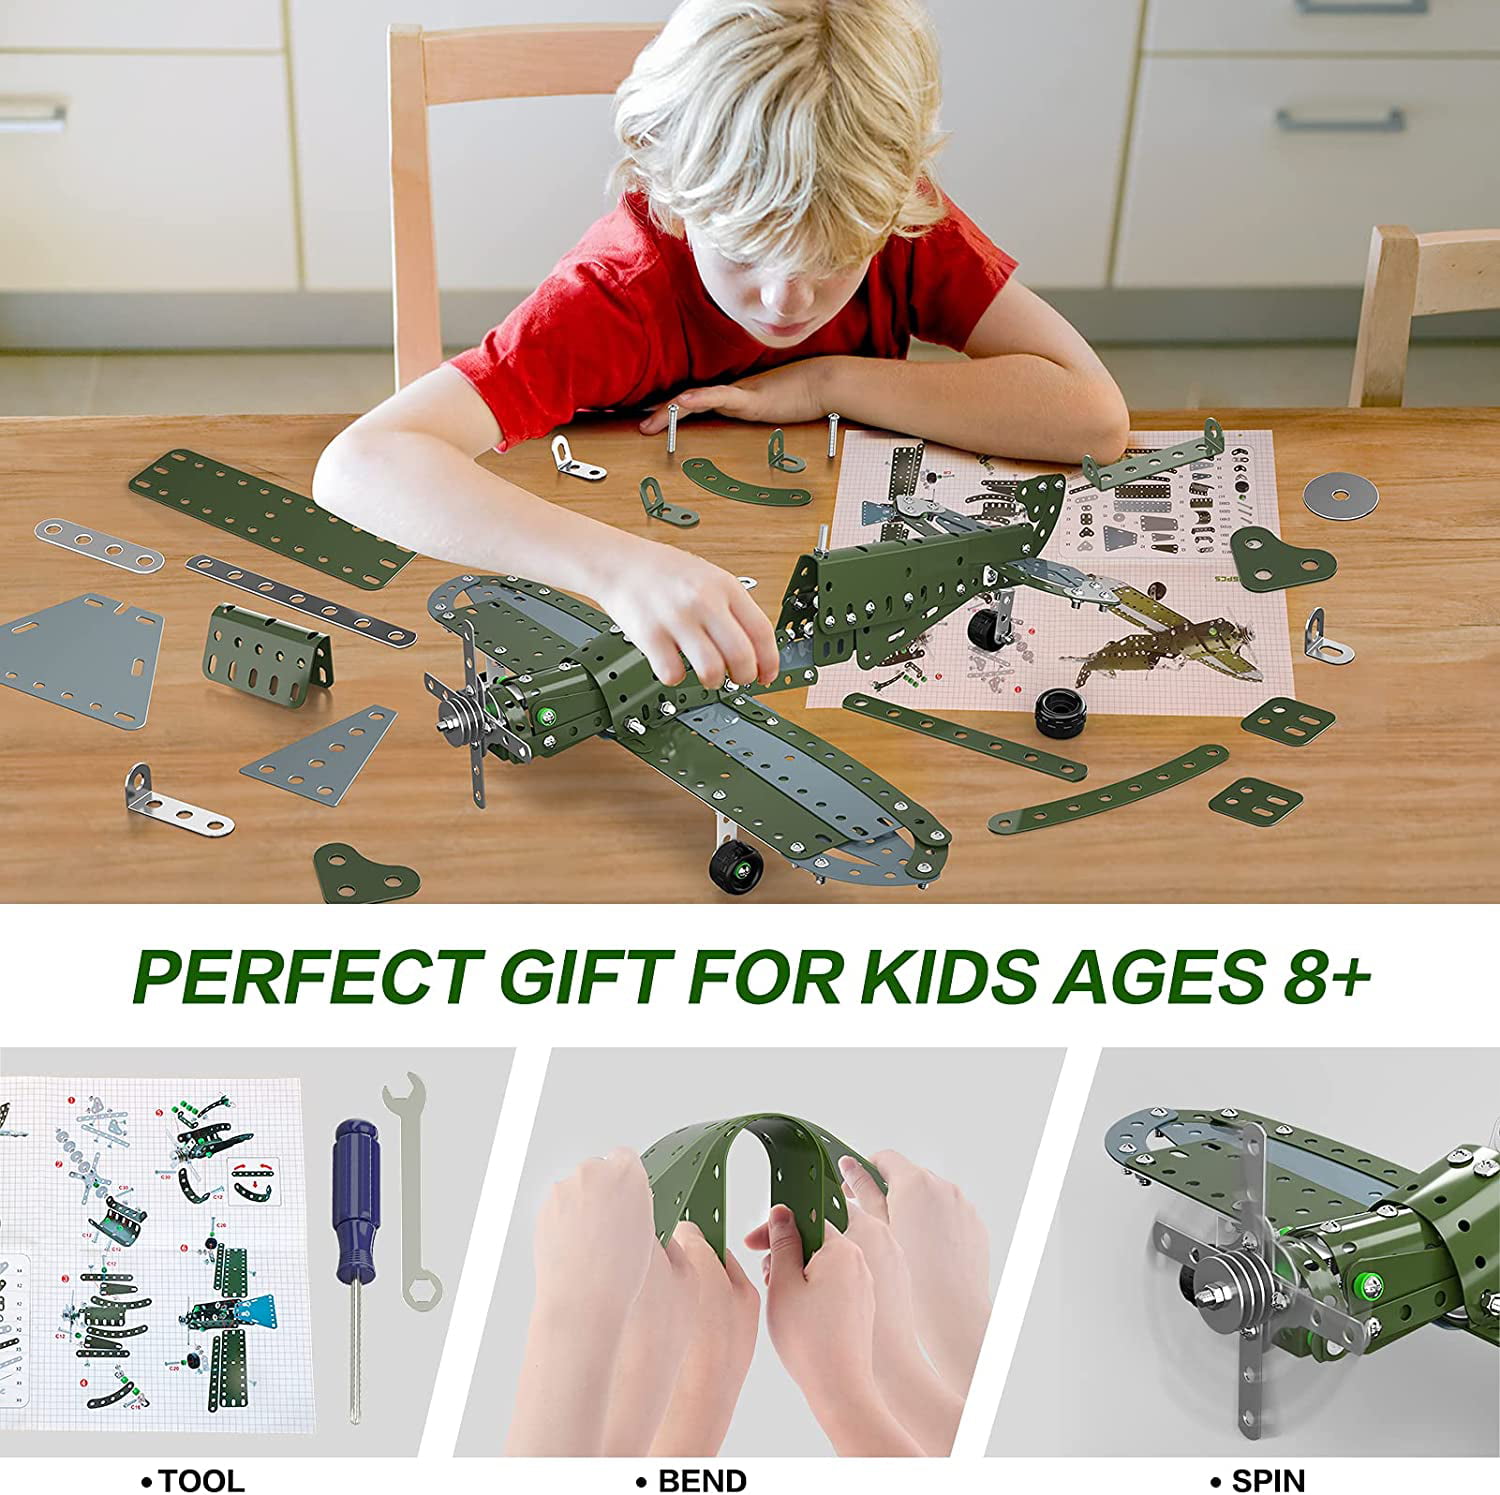 Building Toys Model Airplane Set -258 Pieces DIY Building Stem Projects Toys for Kids Boys Ages 8-12 and Older,Building Assembly Science Educational